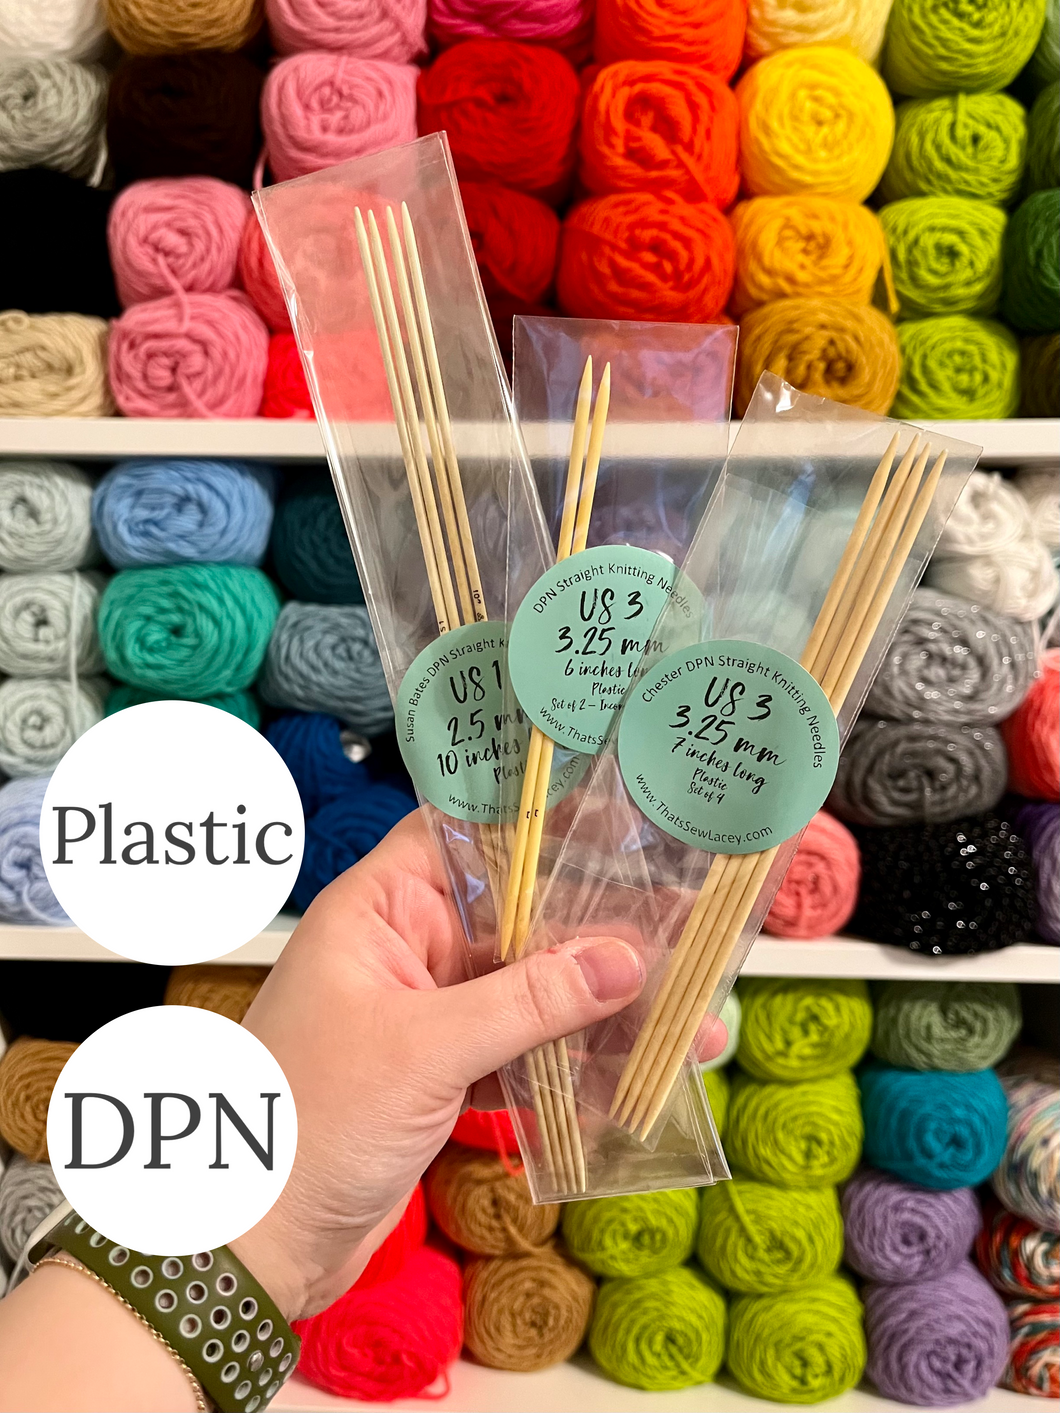 ALL Plastic (DPN) Double Pointed Knitting Needles